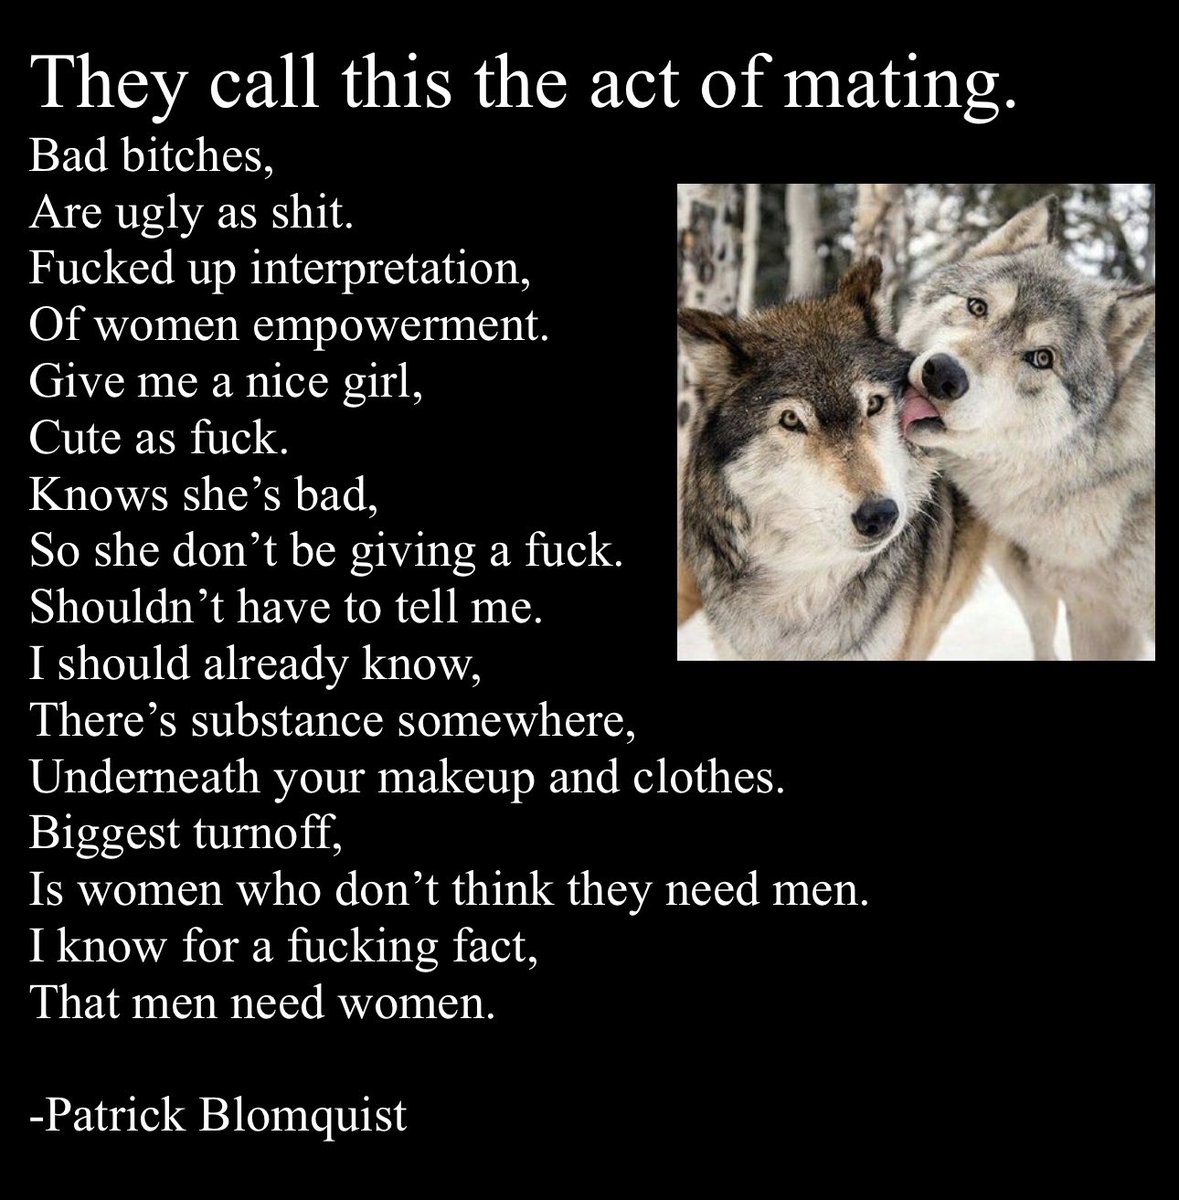 They call this the act of mating. 

#poetsociety #poem #poemsporn #poet #poets #poetryisnotdead #poetryislife #poetryislove #poems #poetry #poetrycommunity #writings #writers #writersnetwork #poetryislove #writeaway #write